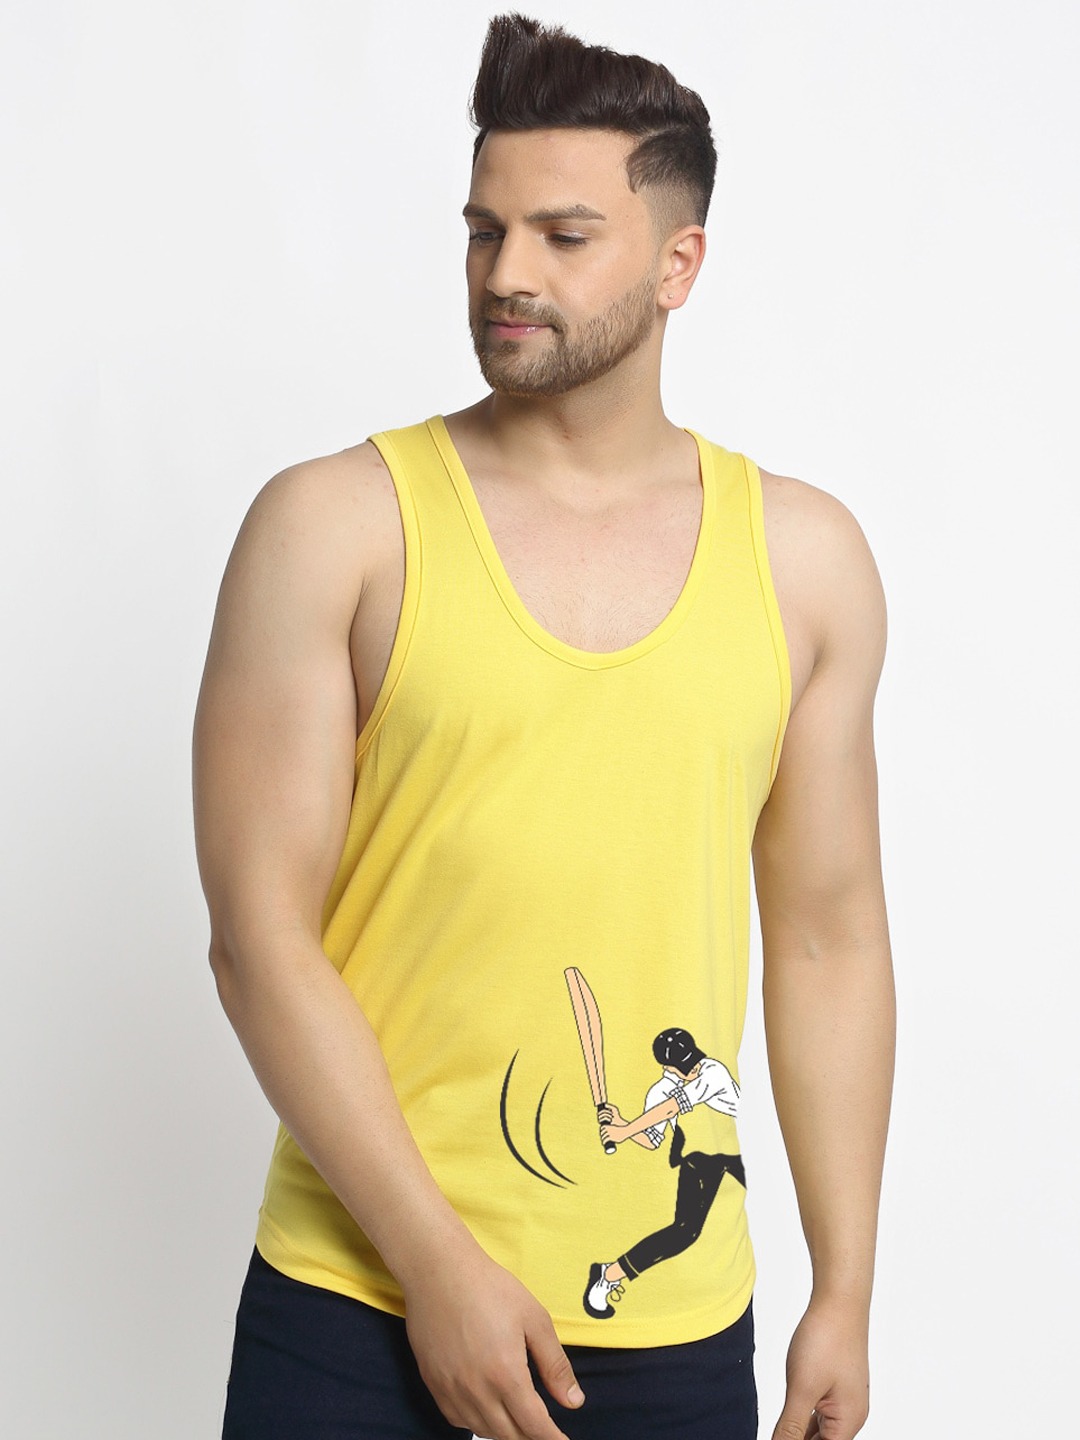 Clothing Innerwear Vests | Friskers Pack Of 2 Printed Sleeveless Gym Vest - XT80000